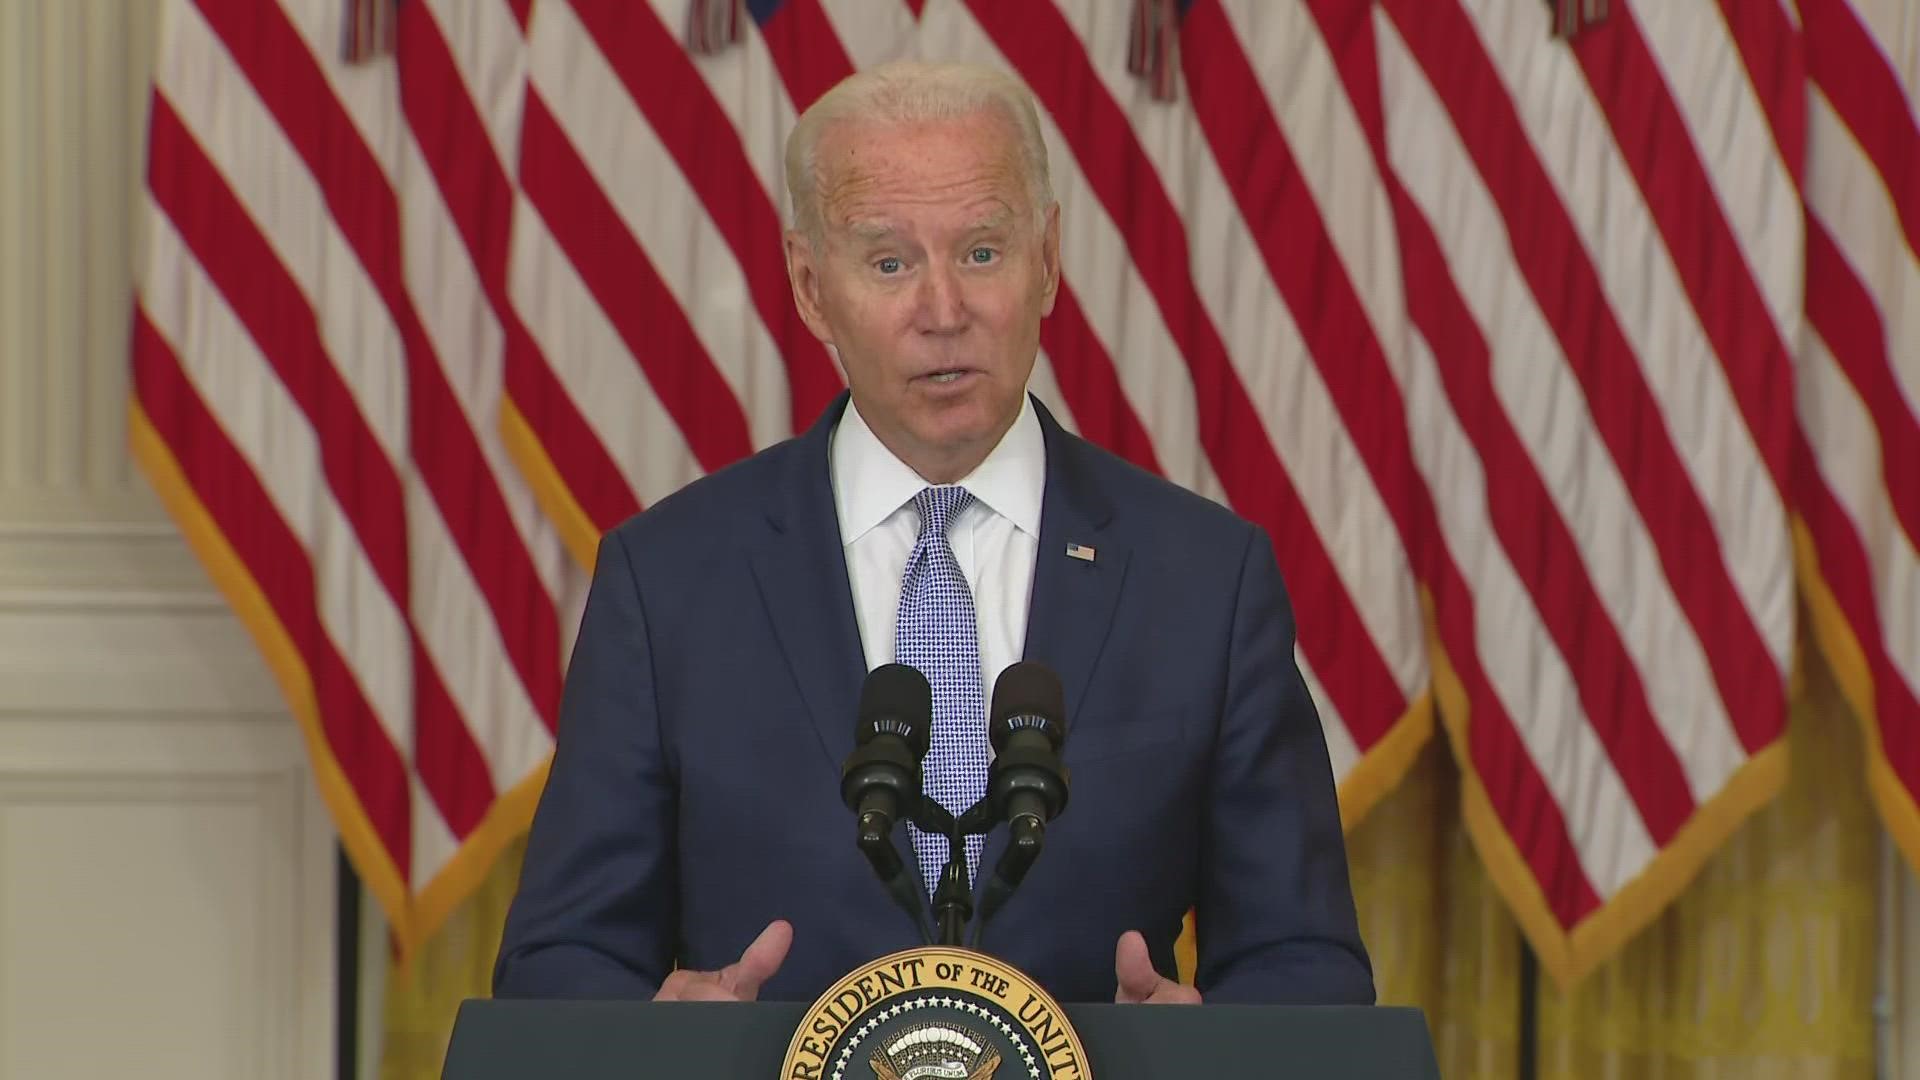 On Thursday, Biden outlined steps his administration is taking to lower the cost of prescription drugs and called on Congress to act as well.